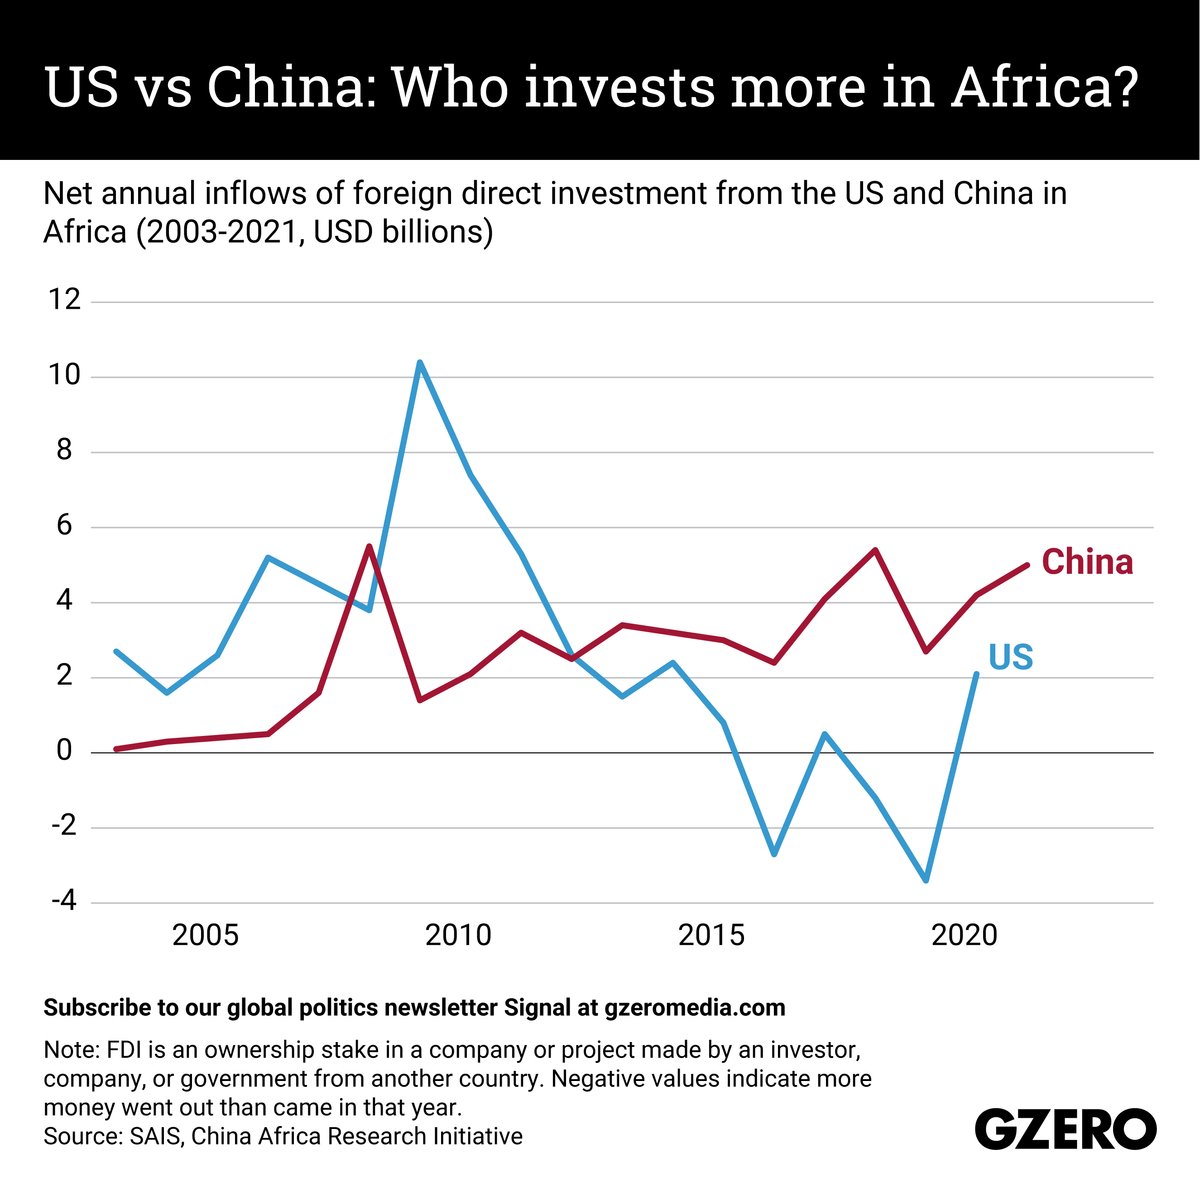 line-chart-showing-net-fdi-flows-from-the-us-and-china-to-africa-since-2003.png